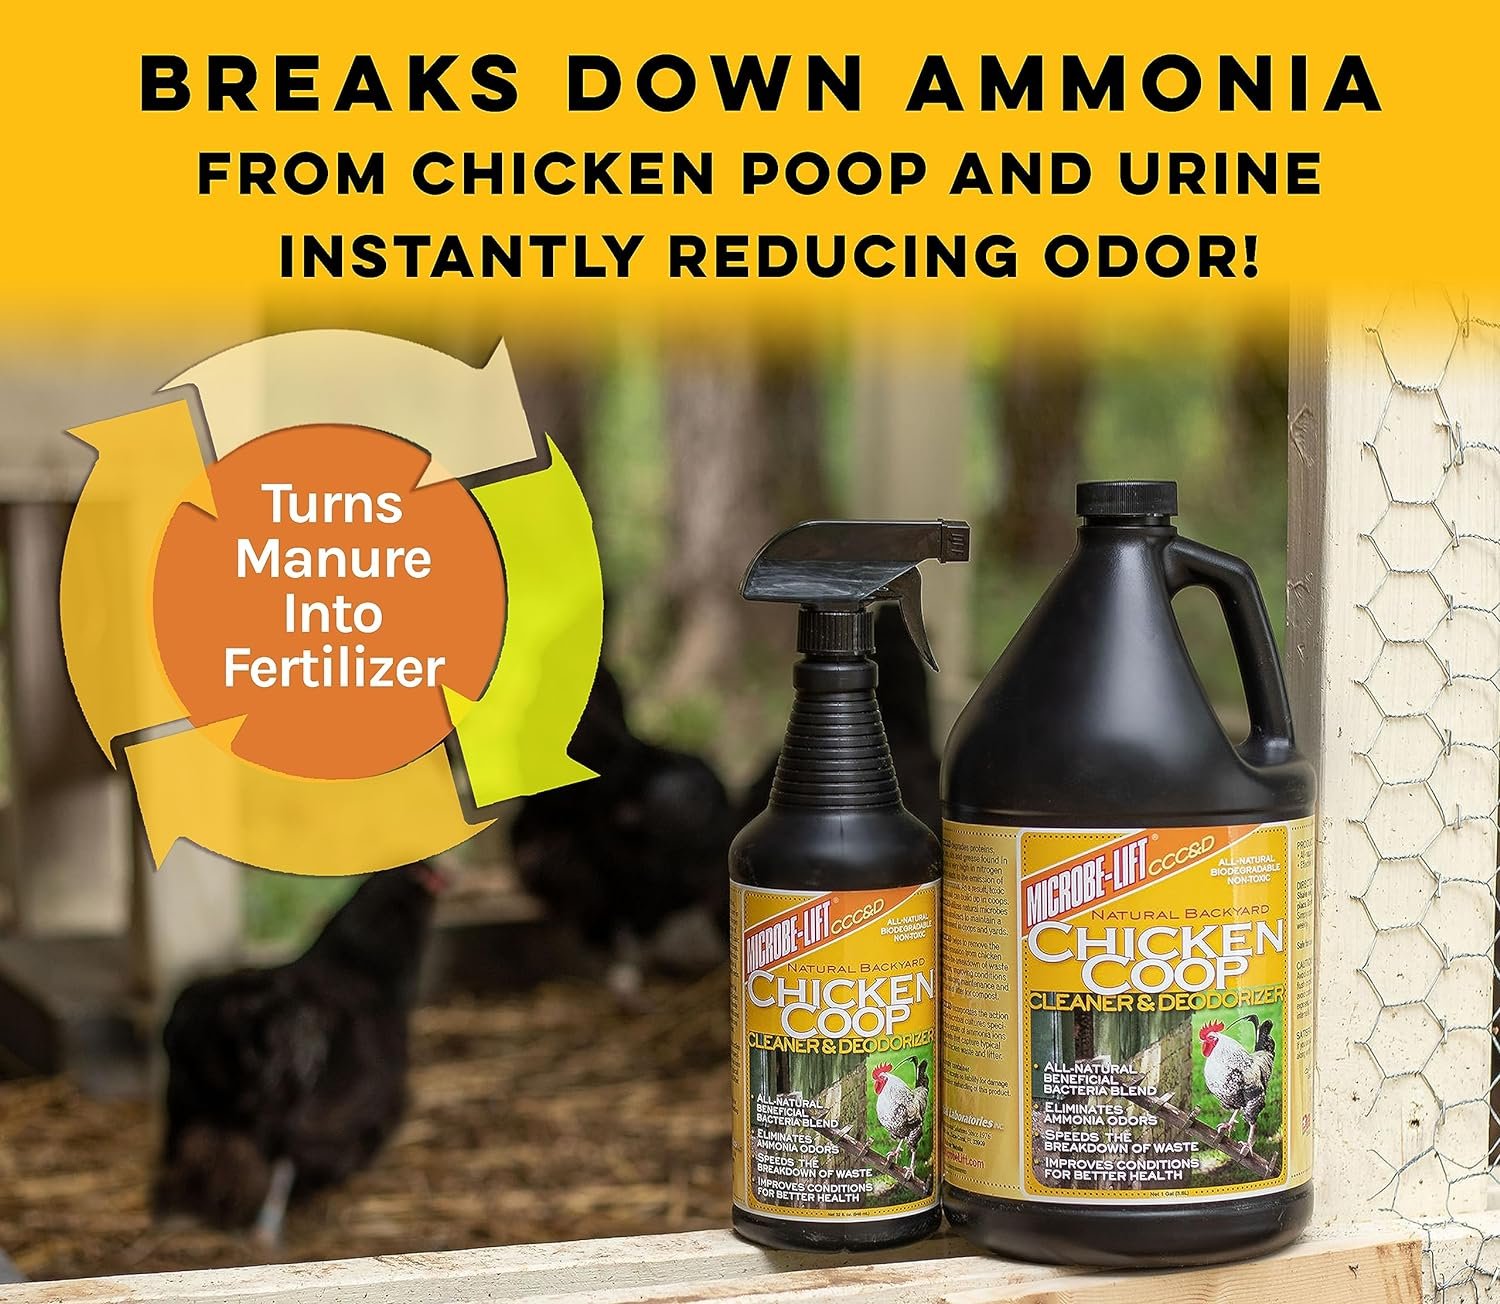 MICROBE-LIFT Chicken Coop Cleaner and Odor Eliminator, Use on All Surfaces and Supplies, Turns Chicken Poop Into Fertilizer, Ammonia Reducer, Highly Concentrated and Safe Formula, 1 Gallon